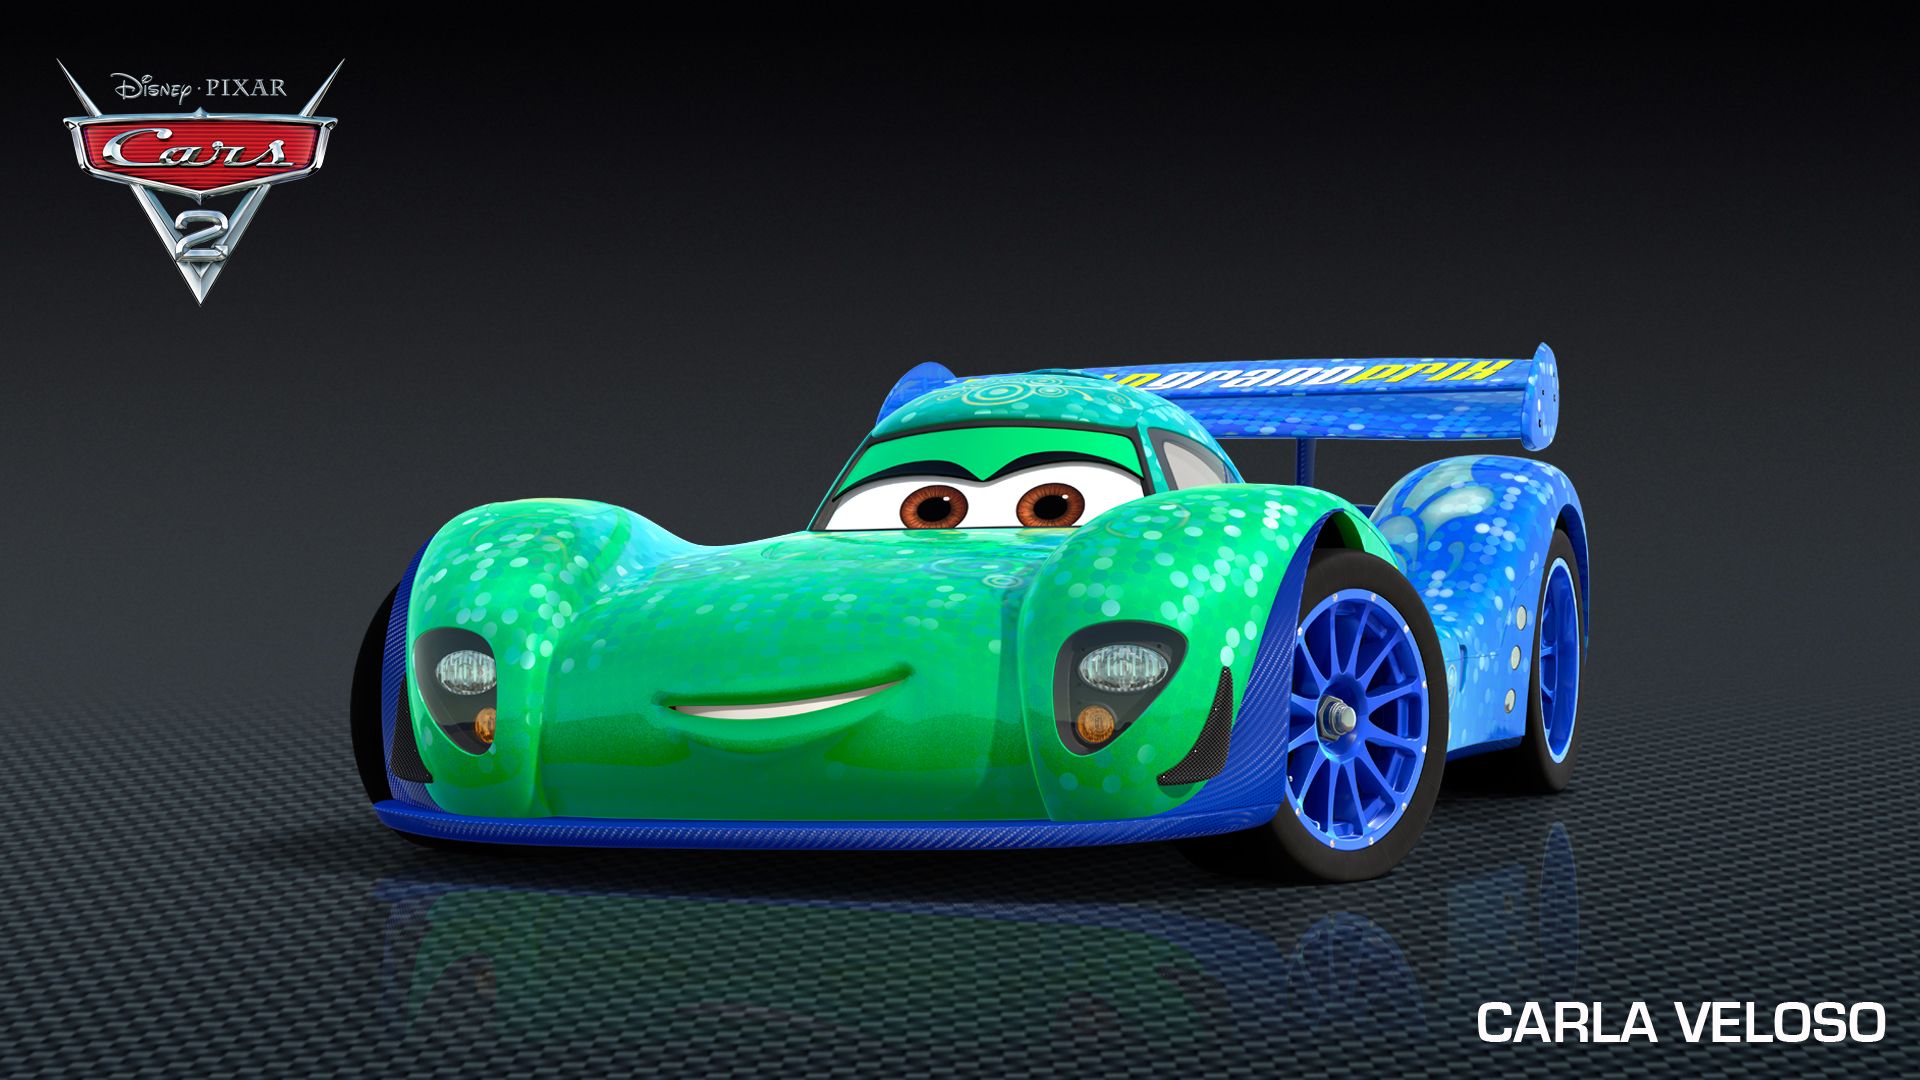 Cars 2 Carla Veloso character poster